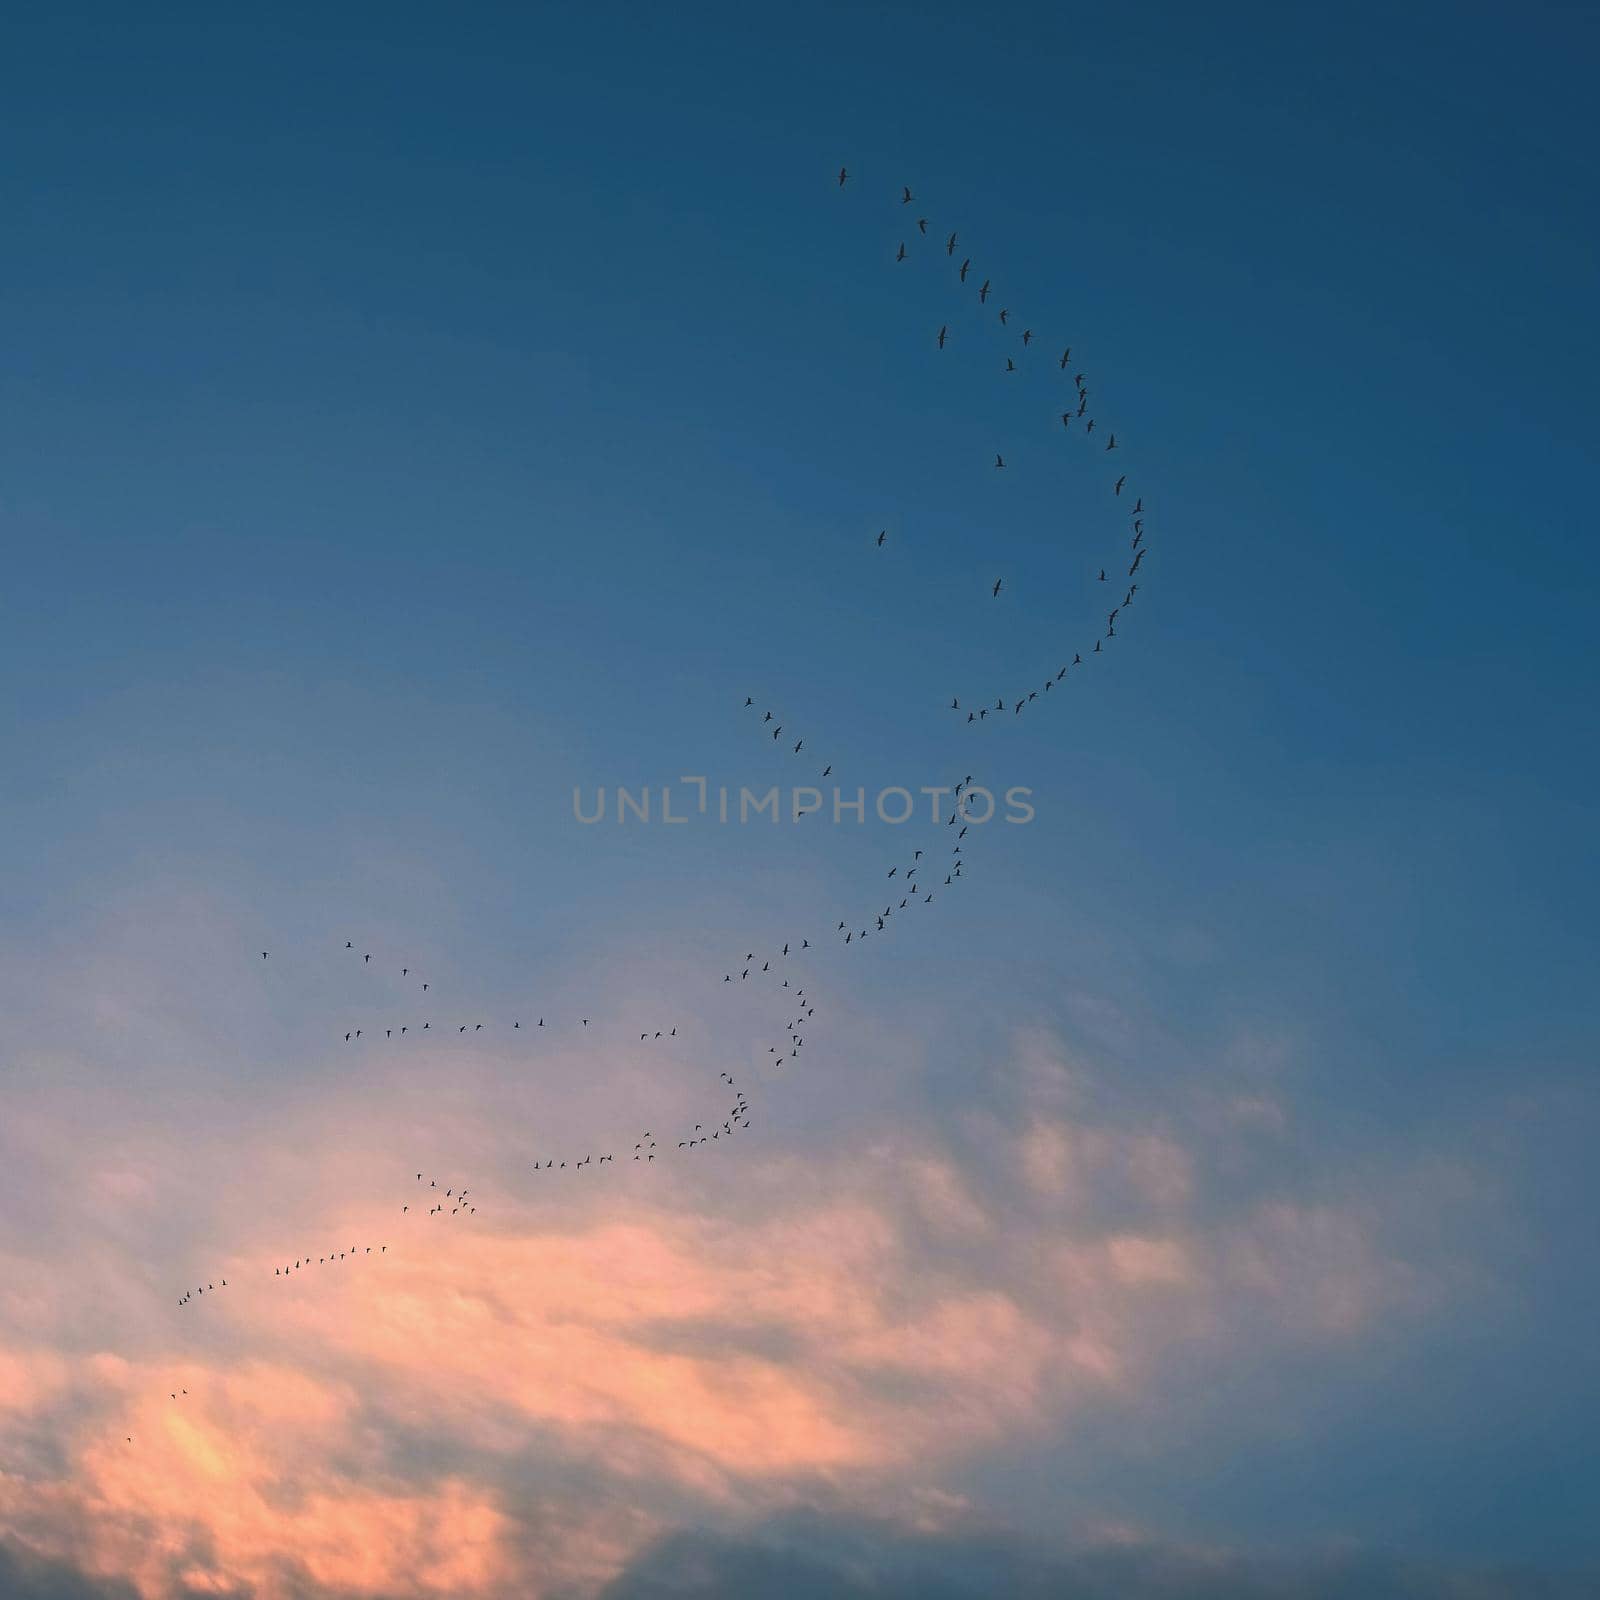 A flock of birds with a blue sky background by Montypeter